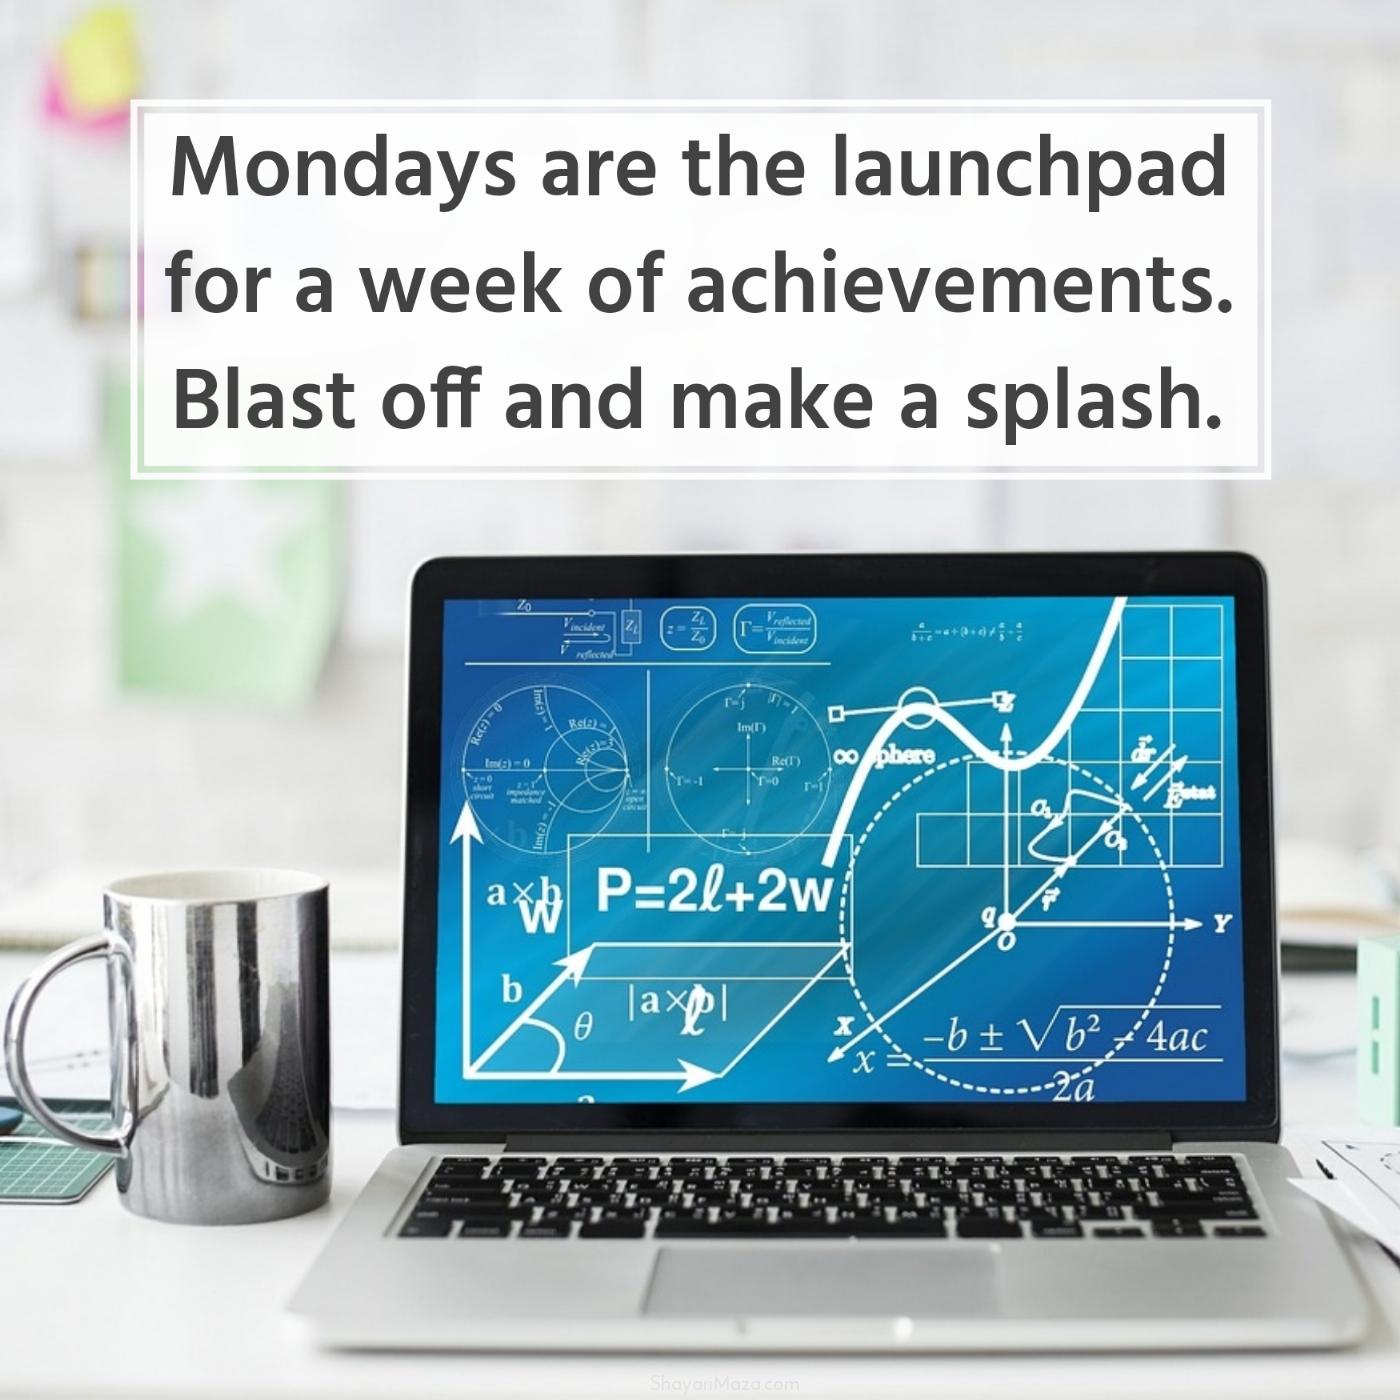 Mondays are the launchpad for a week